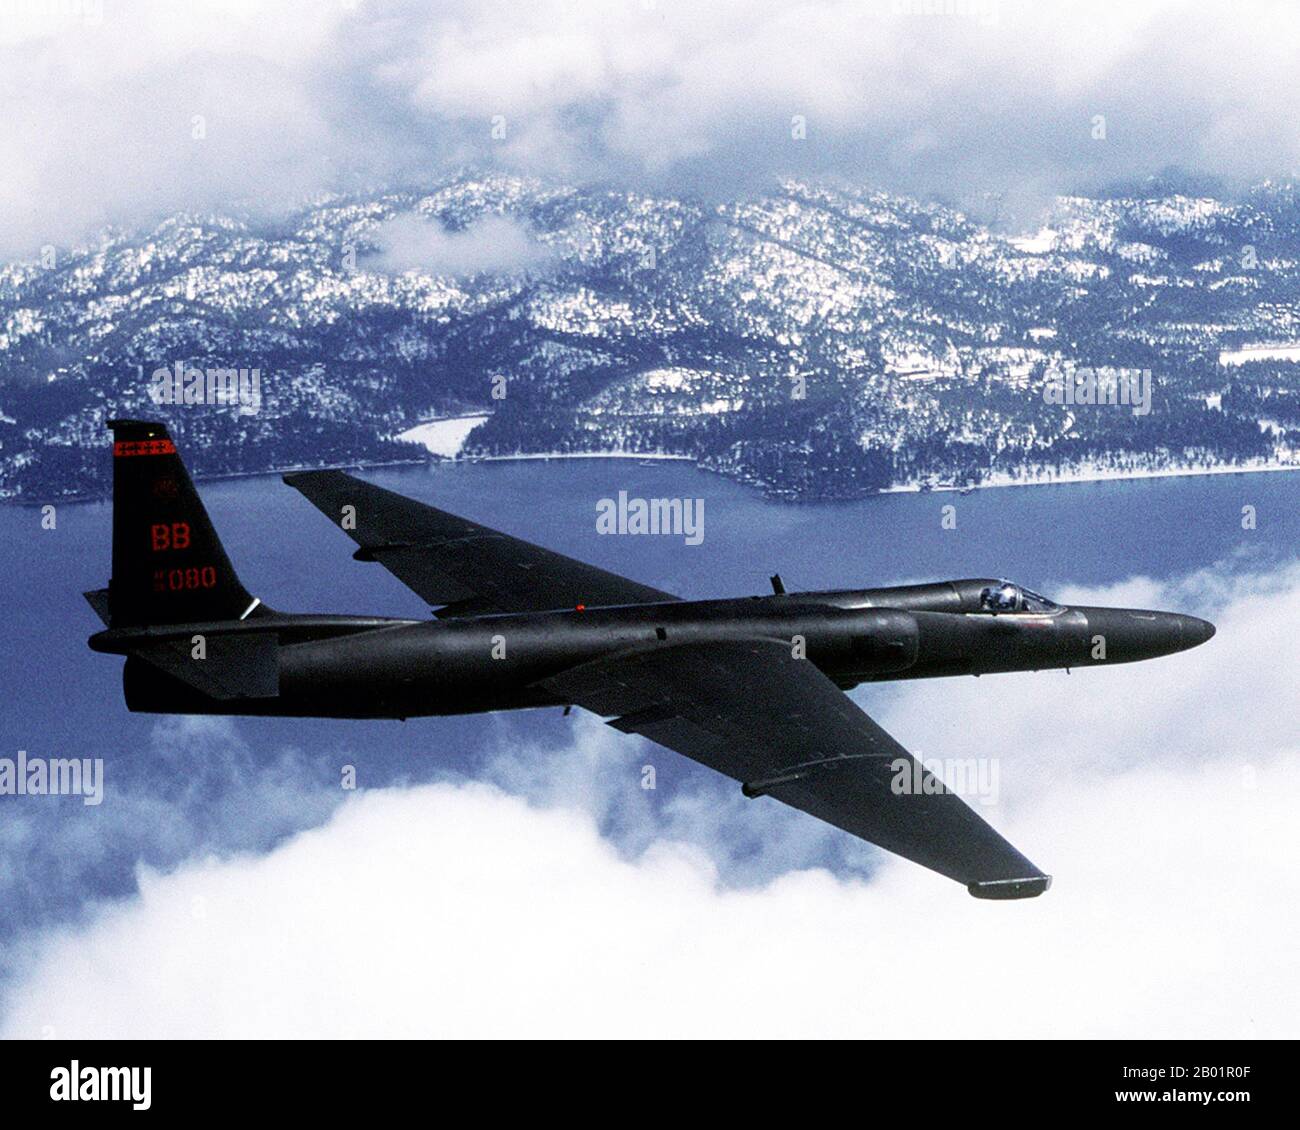 USA: A Lockheed U-2 reconnaissance aircraft or spy plane. Photo by Master Sgt. Rose Reynolds, Beale Air Force Base, California, June 1996.  The Lockheed U-2, nicknamed 'Dragon Lady', is a single-engine, very high-altitude reconnaissance aircraft operated by the United States Air Force (USAF) and previously flown by the Central Intelligence Agency (CIA). It provides day and night, very high-altitude (70,000 feet/21,000 metres), all-weather intelligence gathering. The aircraft is also used for electronic sensor research and development, satellite calibration and satellite data validation. Stock Photo